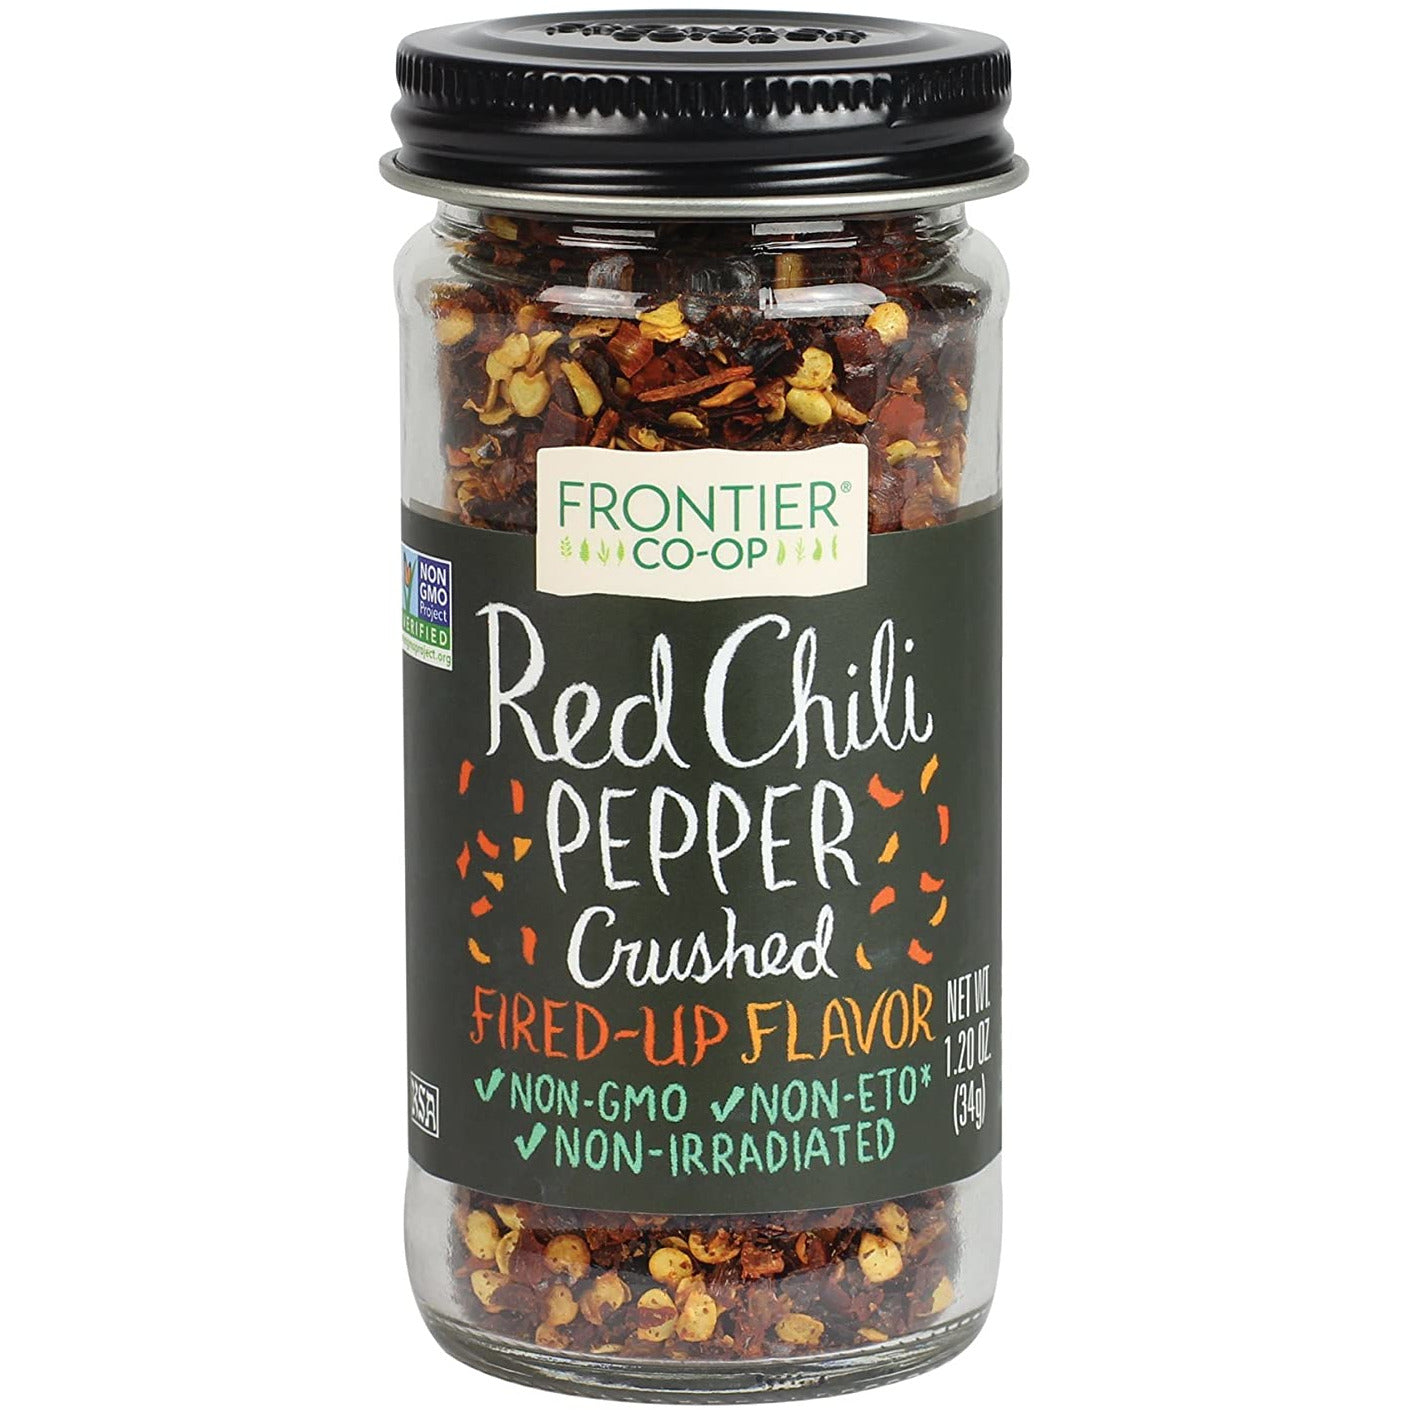 Frontier Chili Peppers Red Crushed 1.2 Oz.